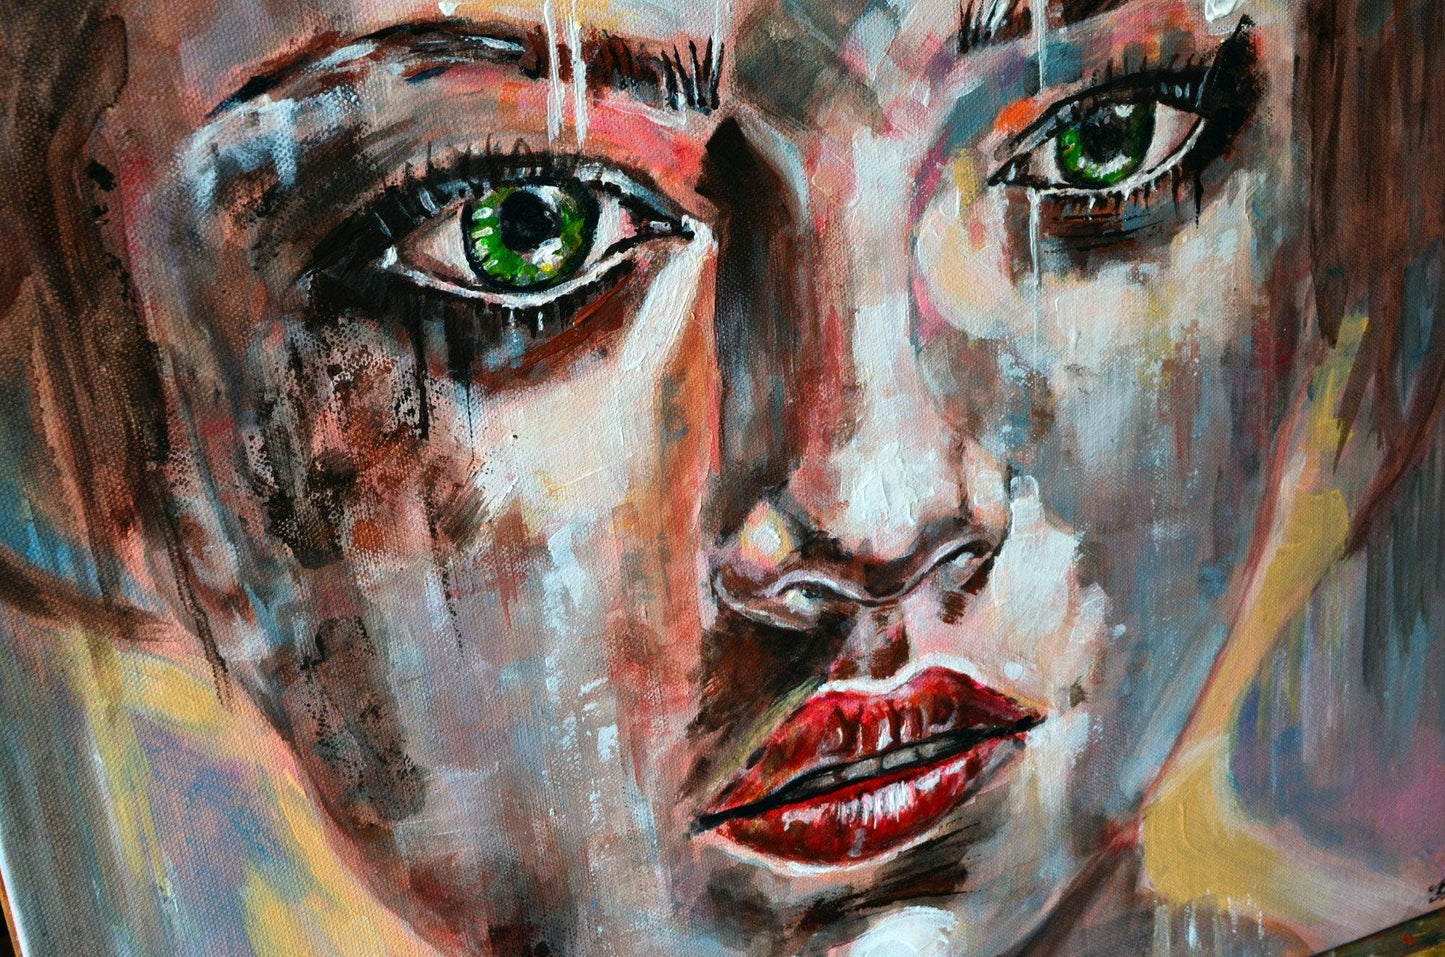 Abstract art 'Shining' by Misty Lady, featuring a dynamic and vibrant woman portrait.